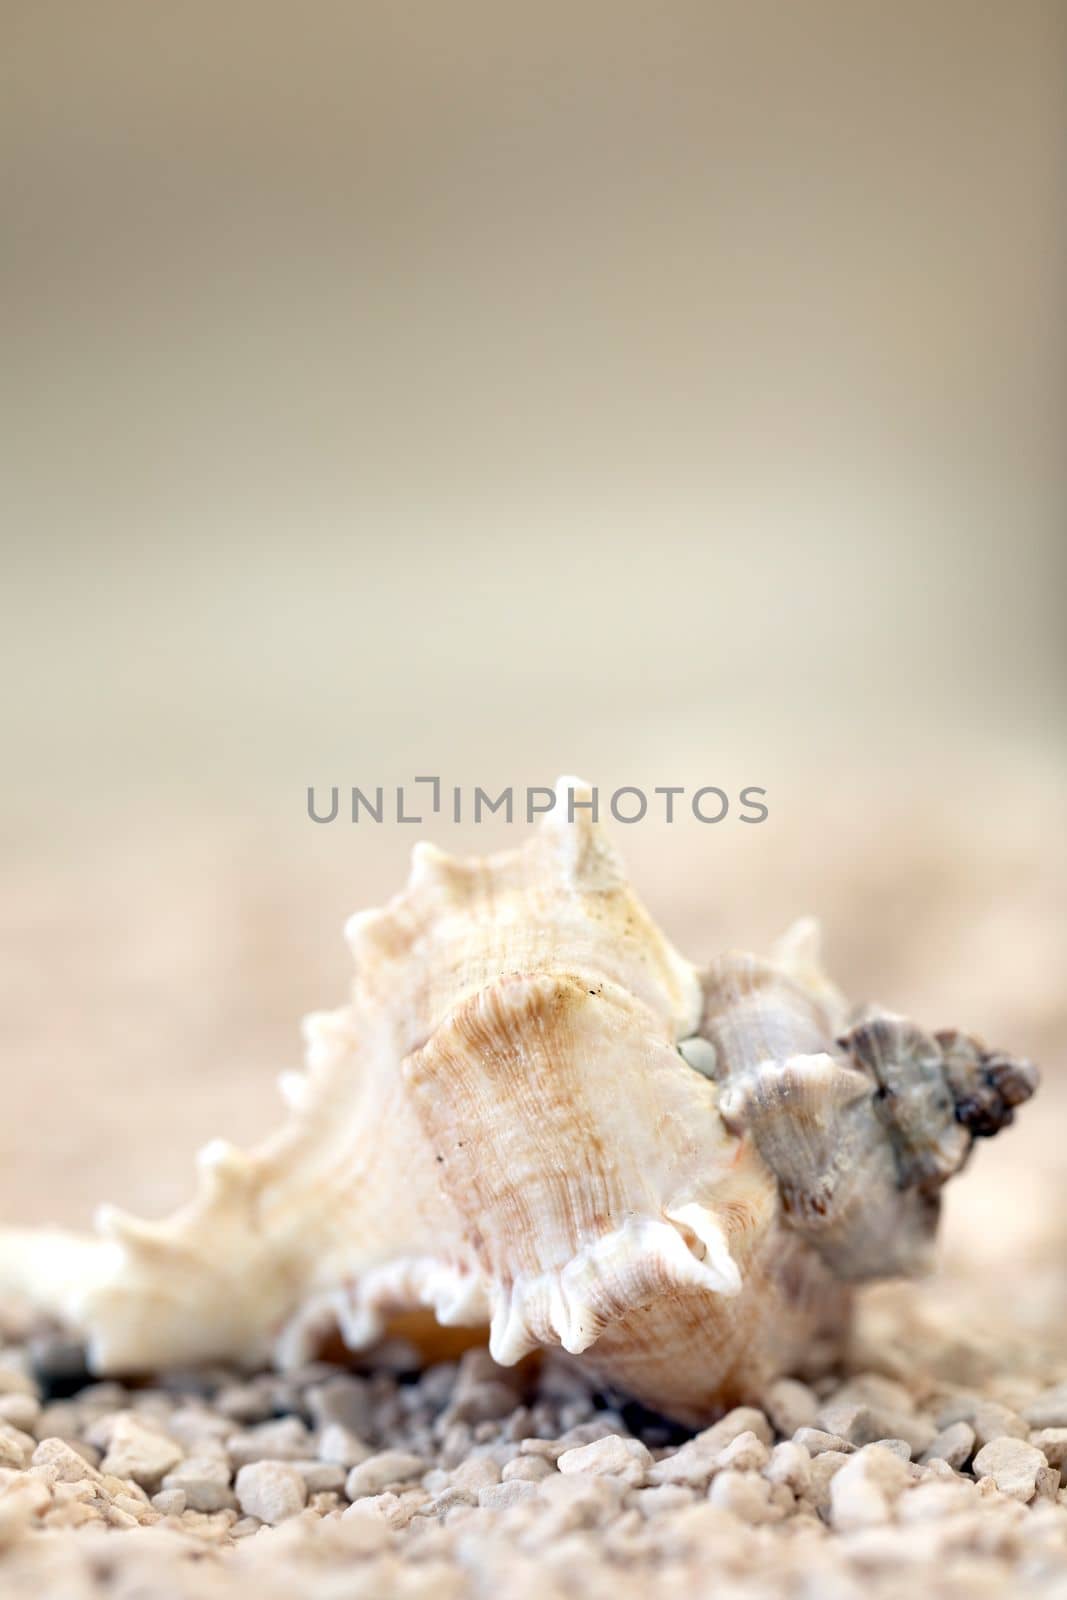 Sea shells at the beach soft focus blurred background for copy space, Summer nature concept, tropical sand colors by Annebel146